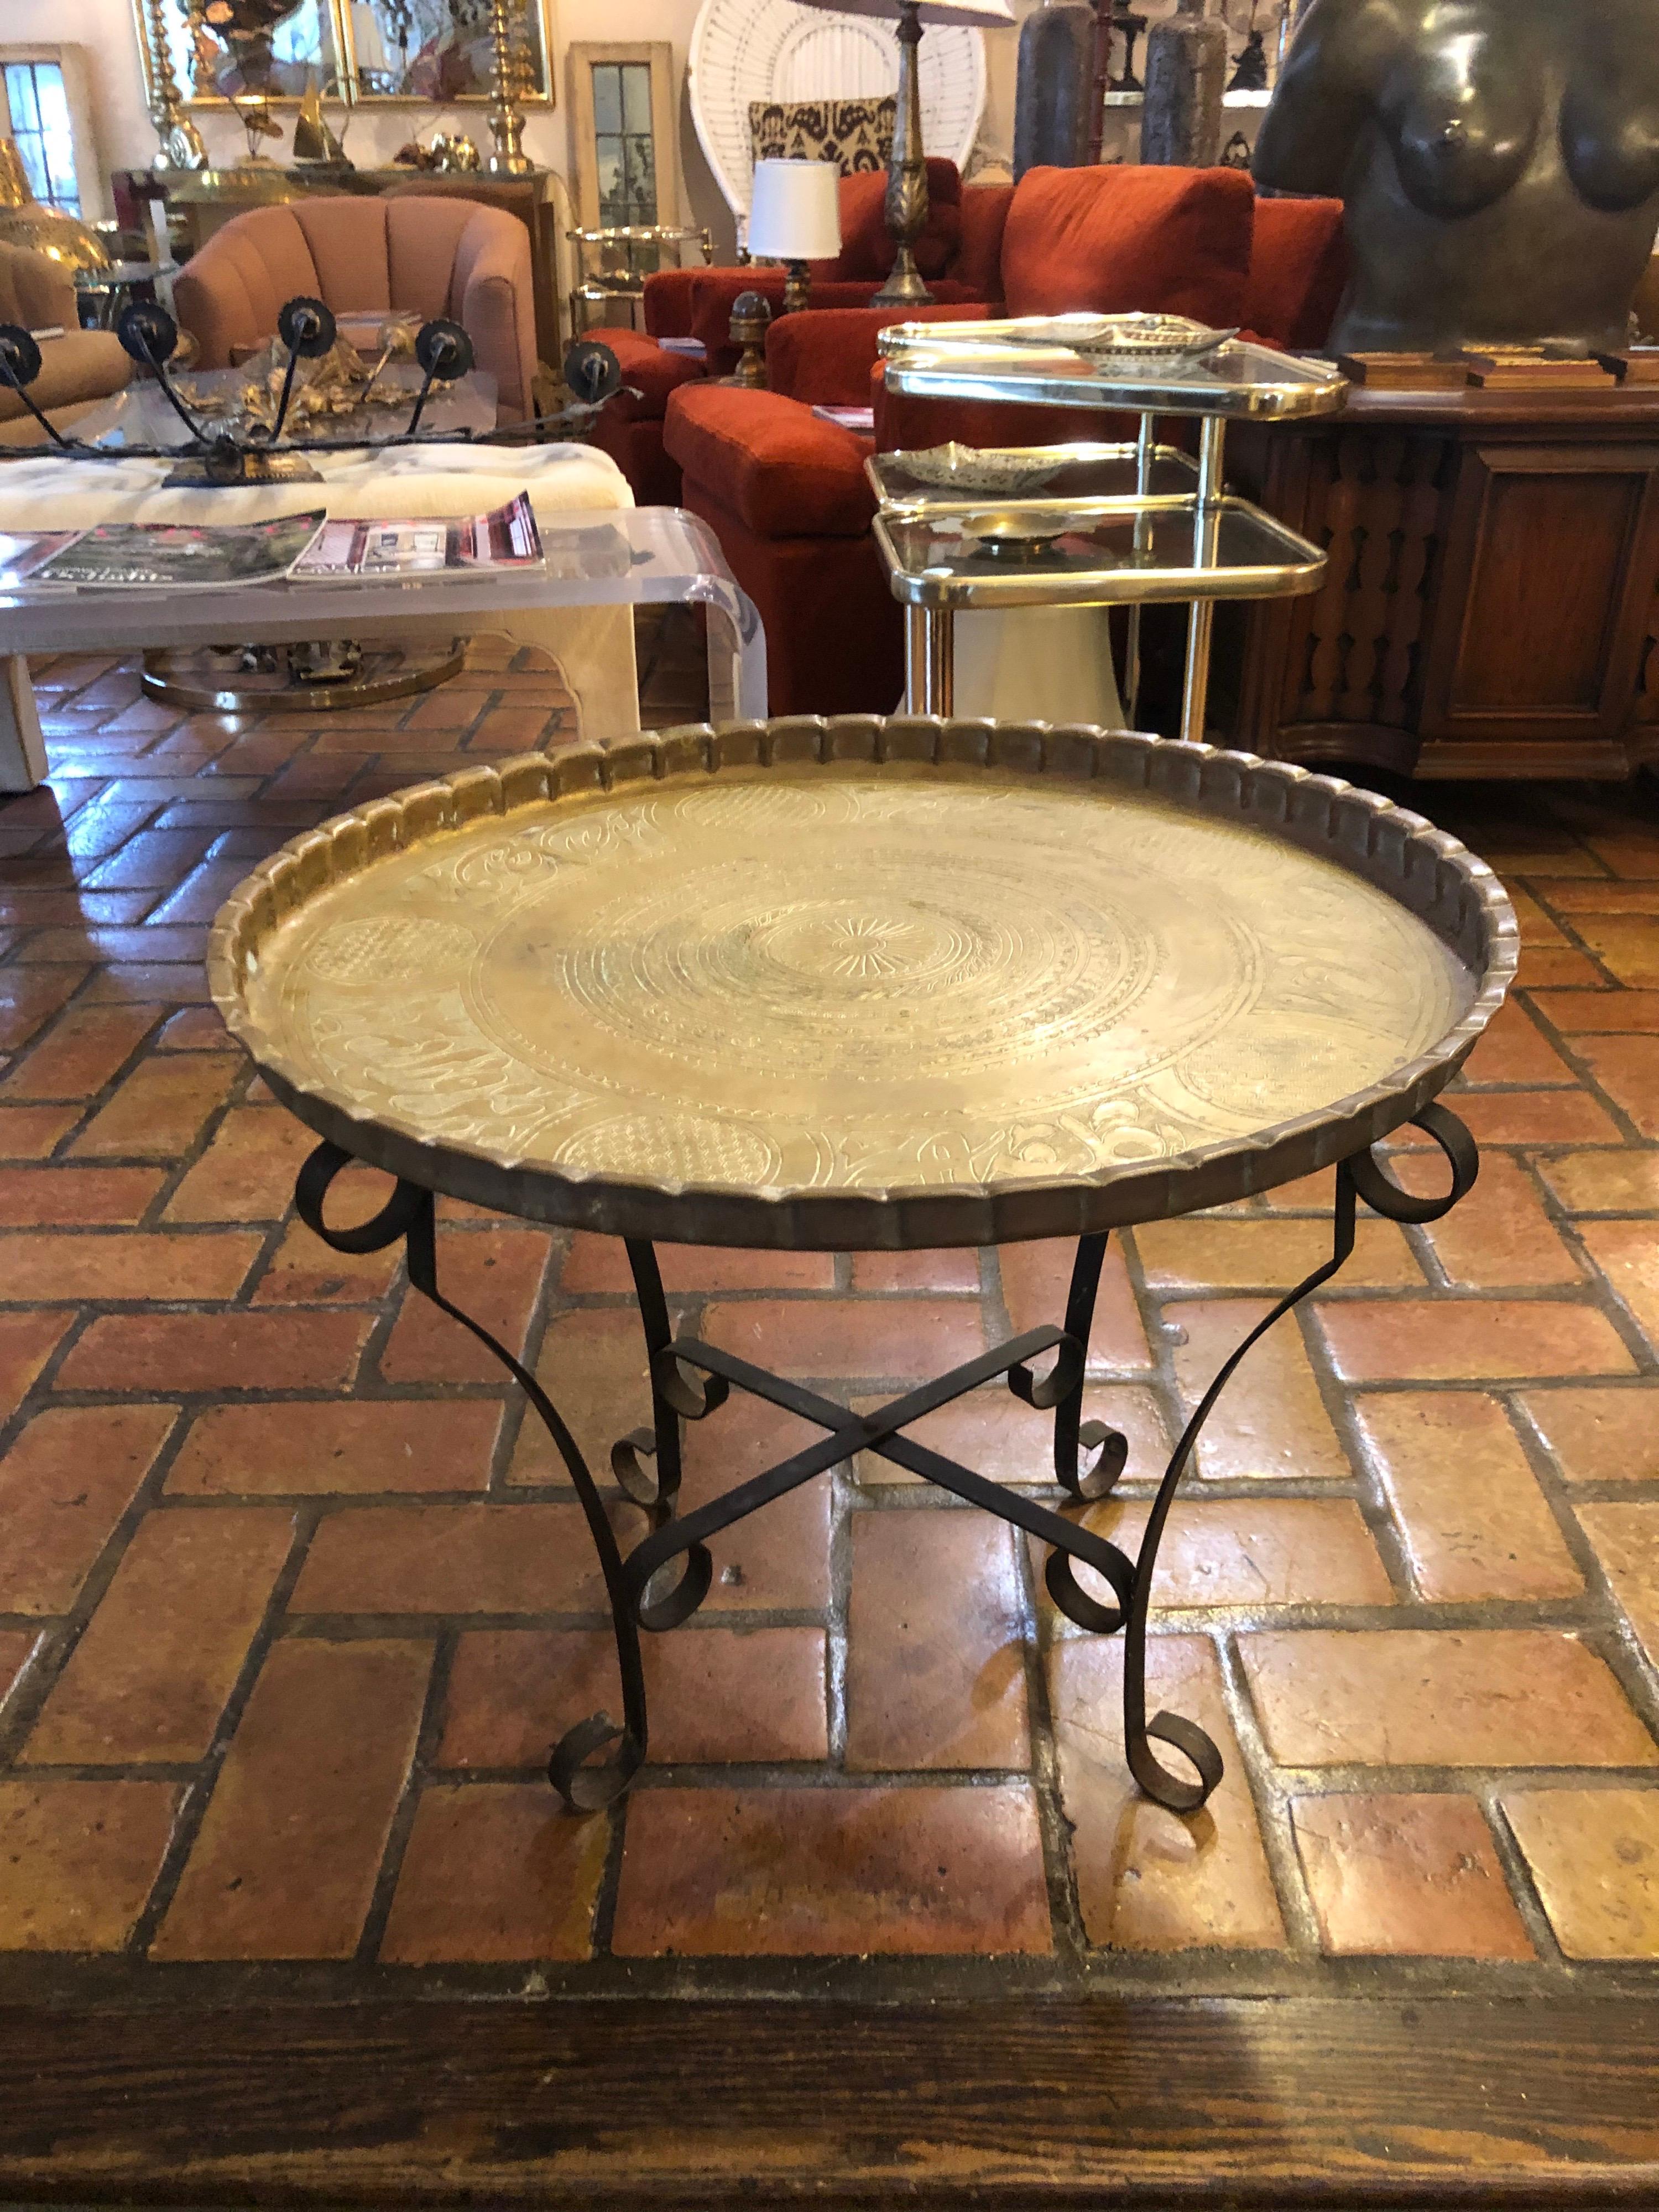 Brass tray table with folding stand. Round chased Brass Tray with fluted edges. Sits on top of a folding iron stand. Please ignore the white glove quote. This item can parcel ship for under $100 via parcel in the continental US.